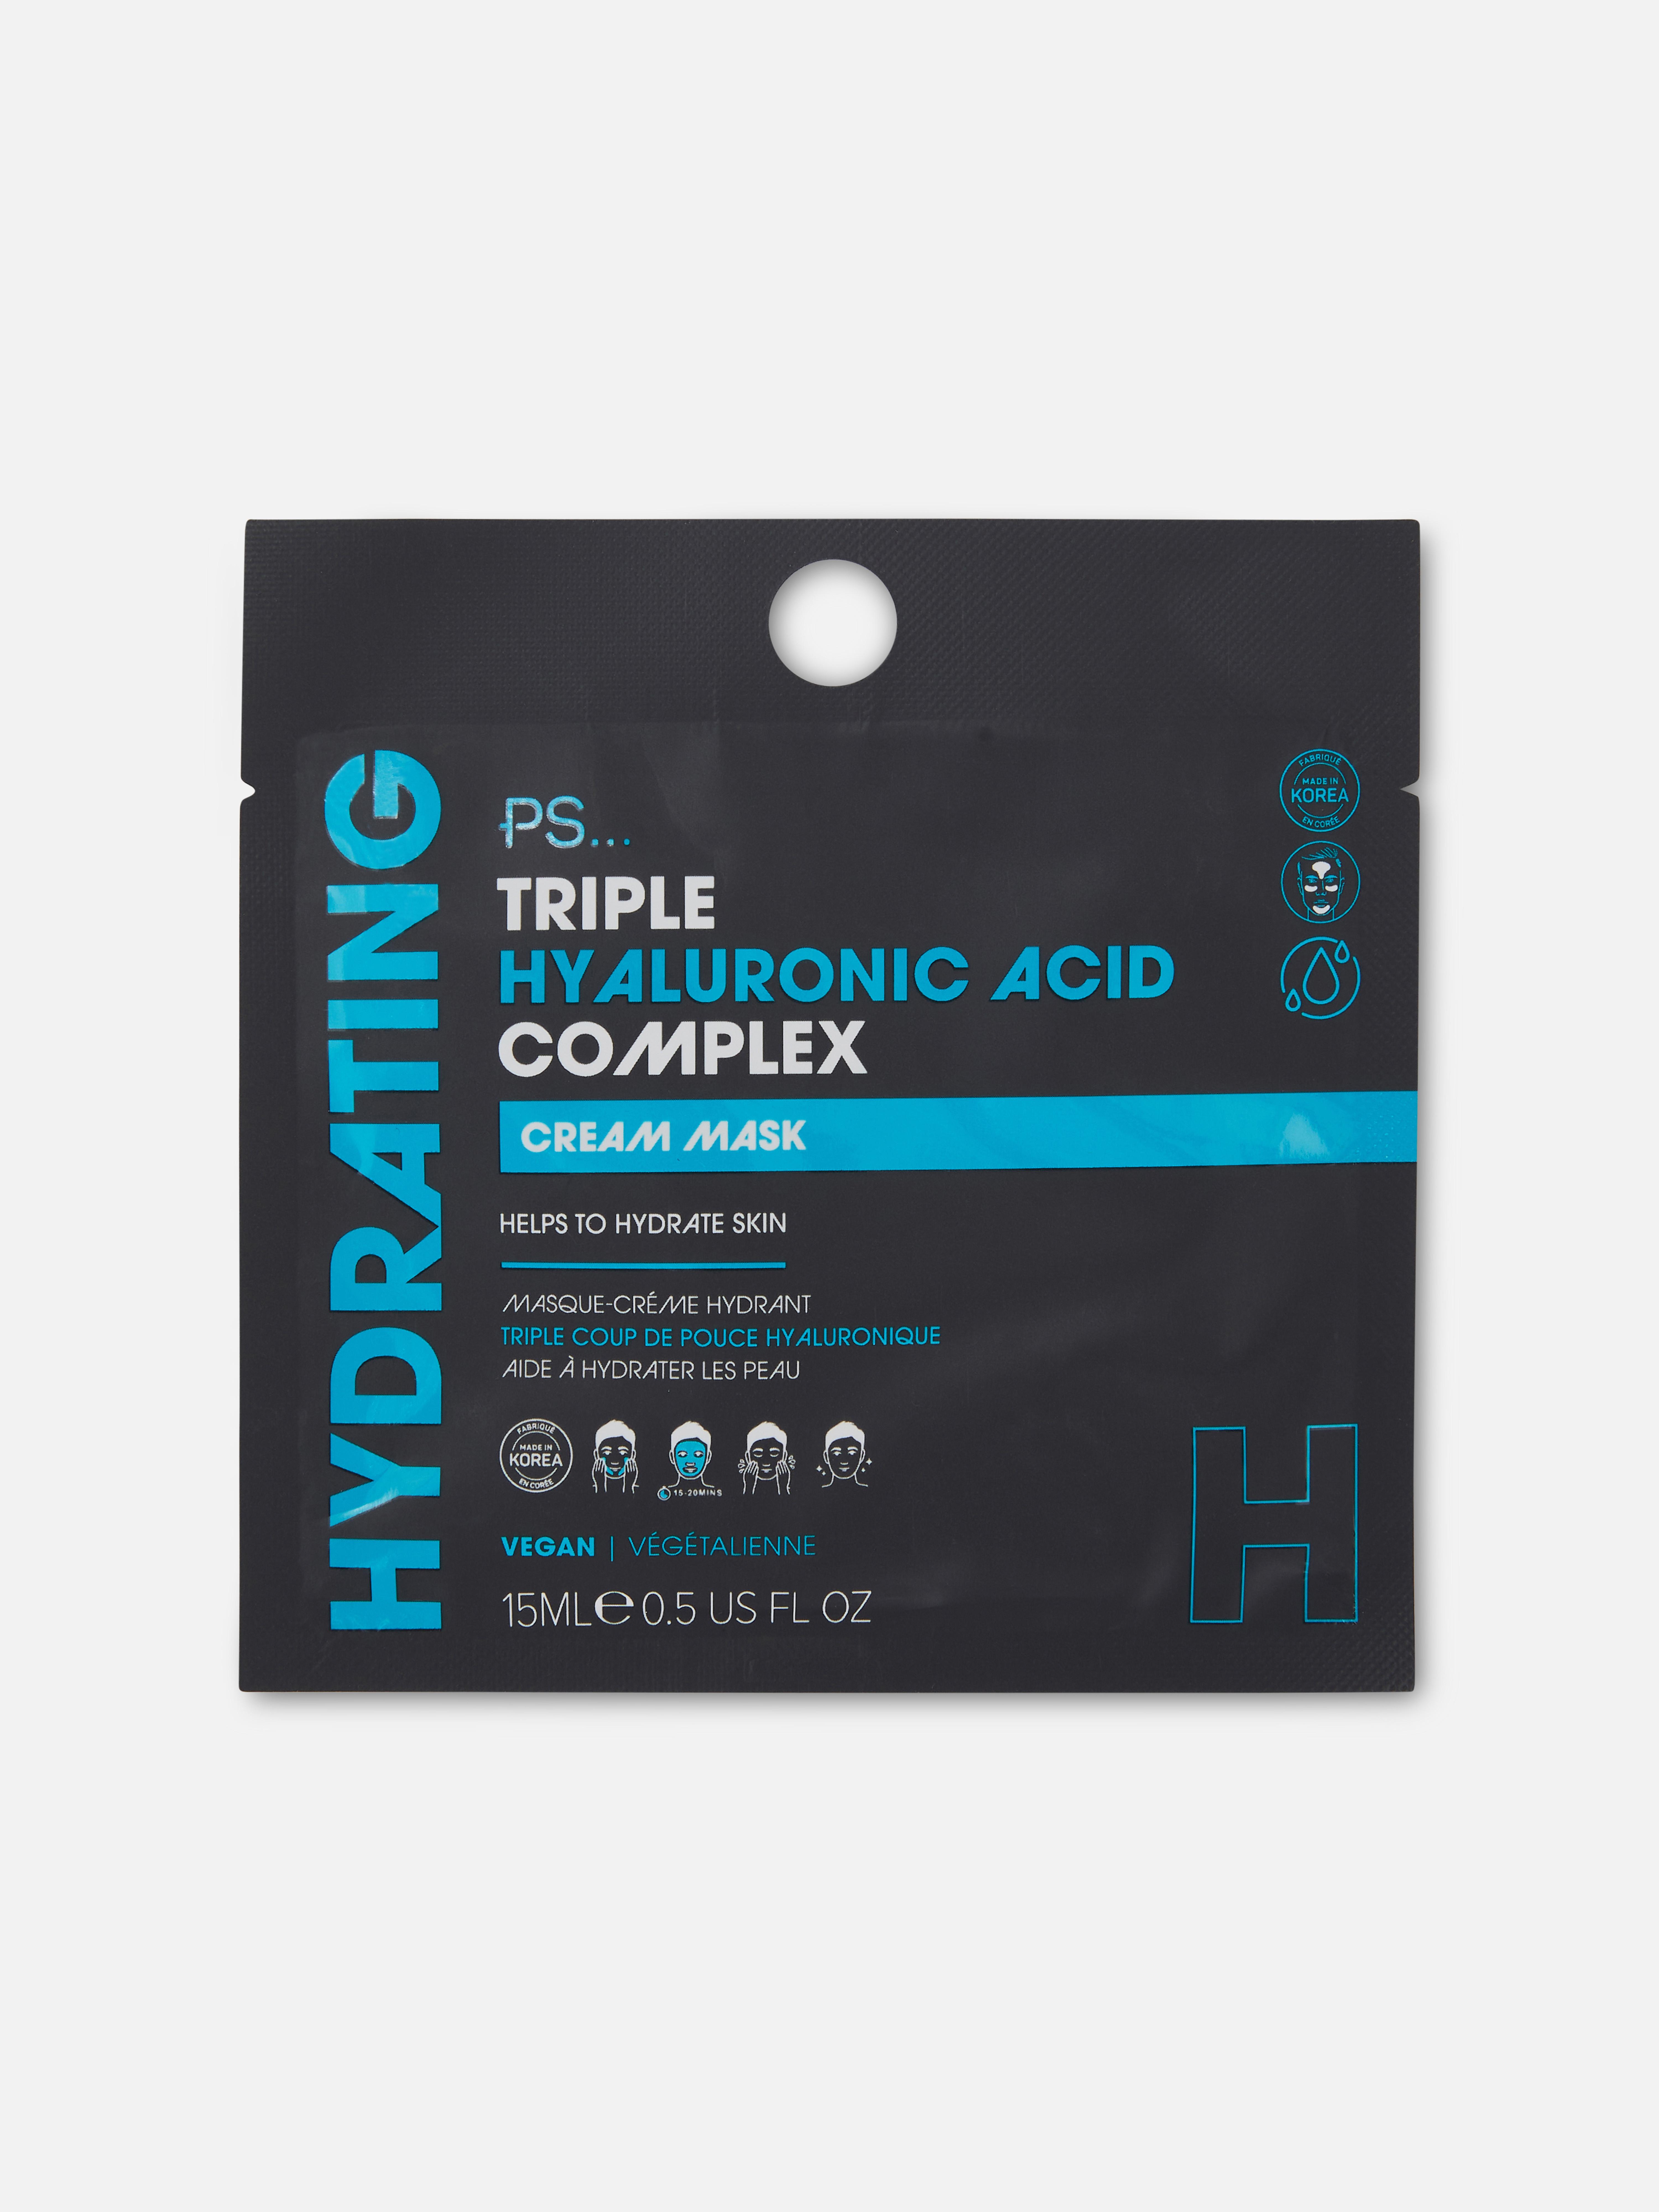 PS… Triple Hyaluronic Acid Complex Face Mask